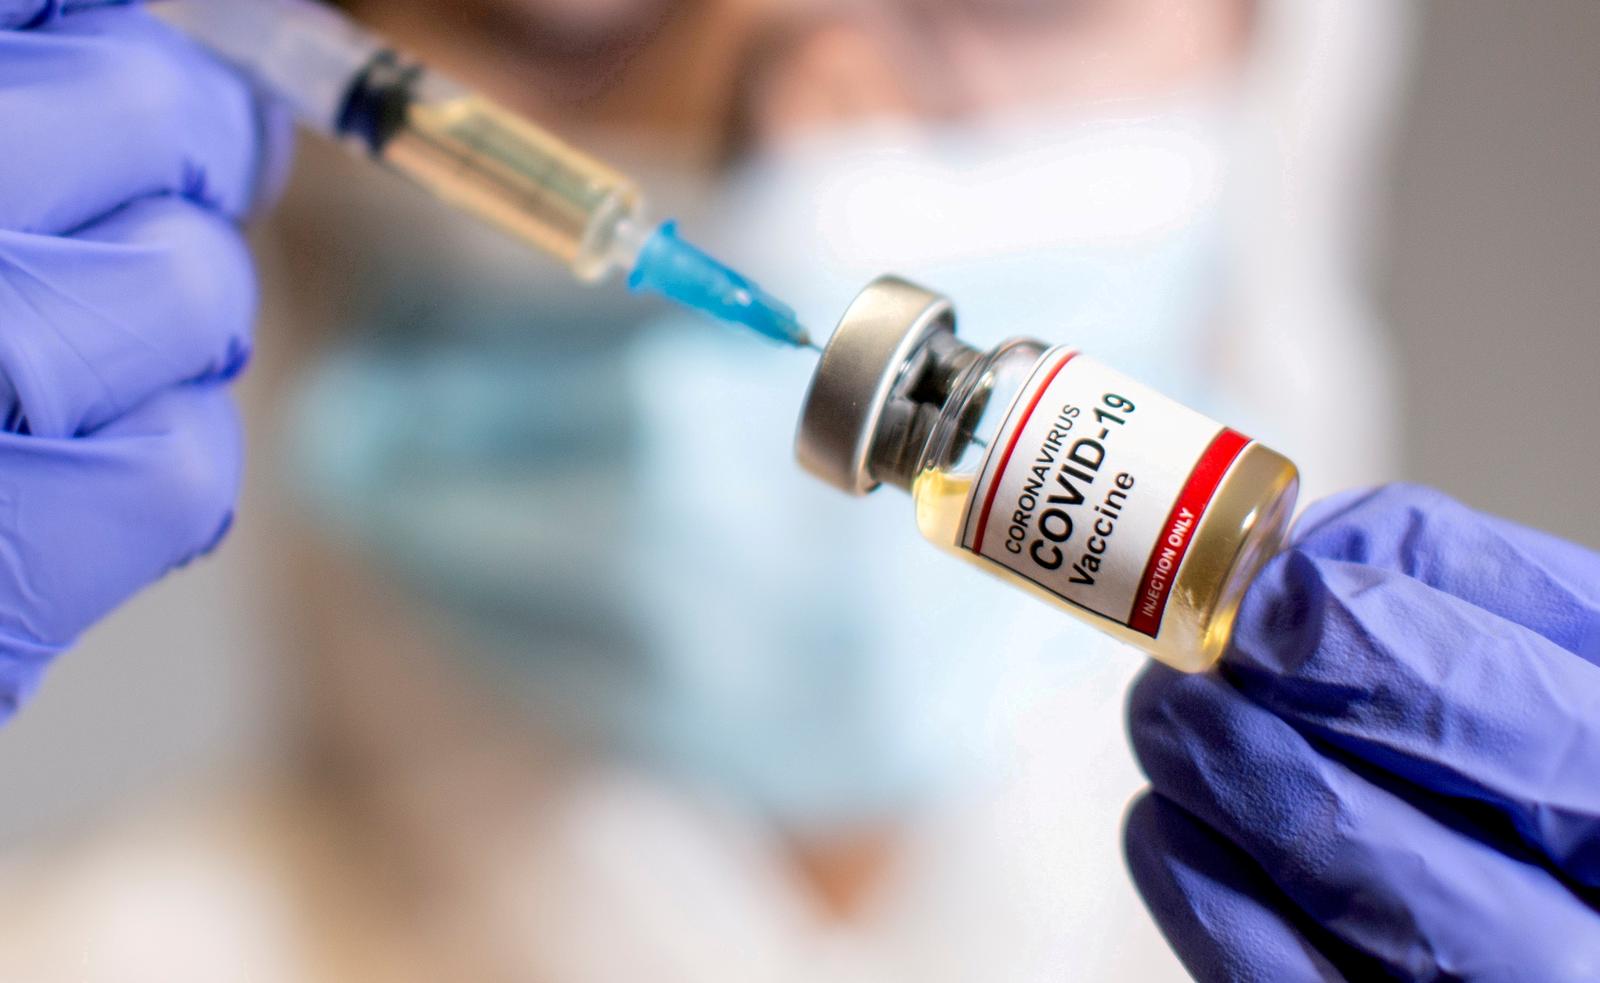 Vaccine makers should license technology to overcome 'grotesque' inequity: WHO